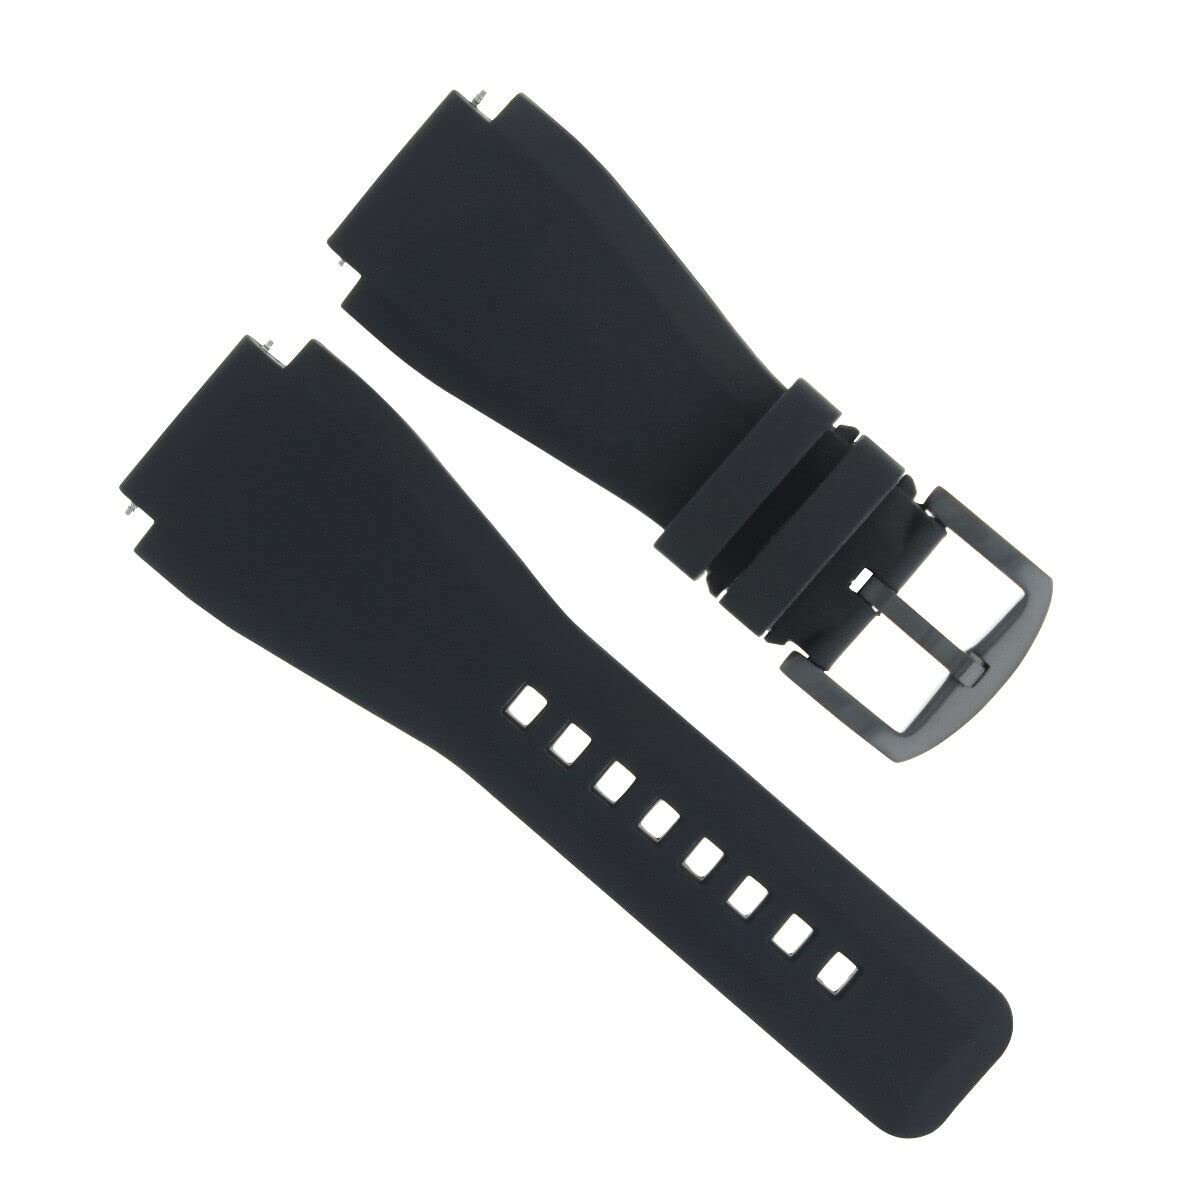 Ewatchparts 24MM SILICONE RUBBER WATCH BAND BRACELET STRAP FOR BELL ROSS BR-01-BR-03 BLACK